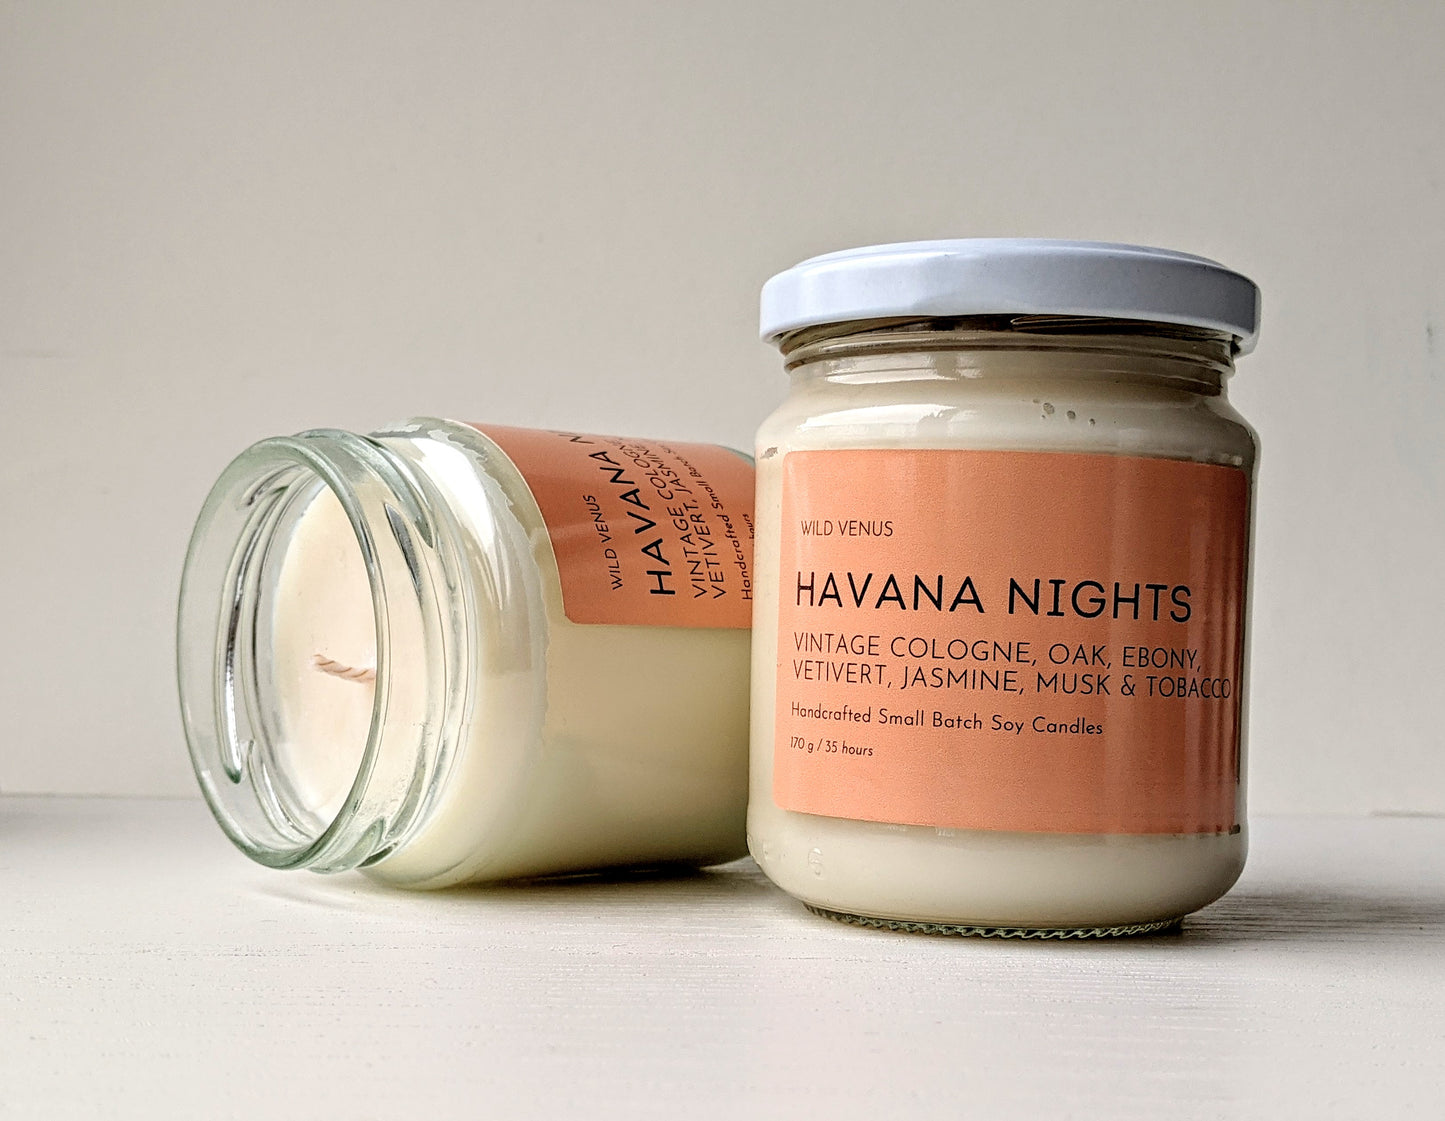 Two Havana Nights hand made soy candles against a white background.